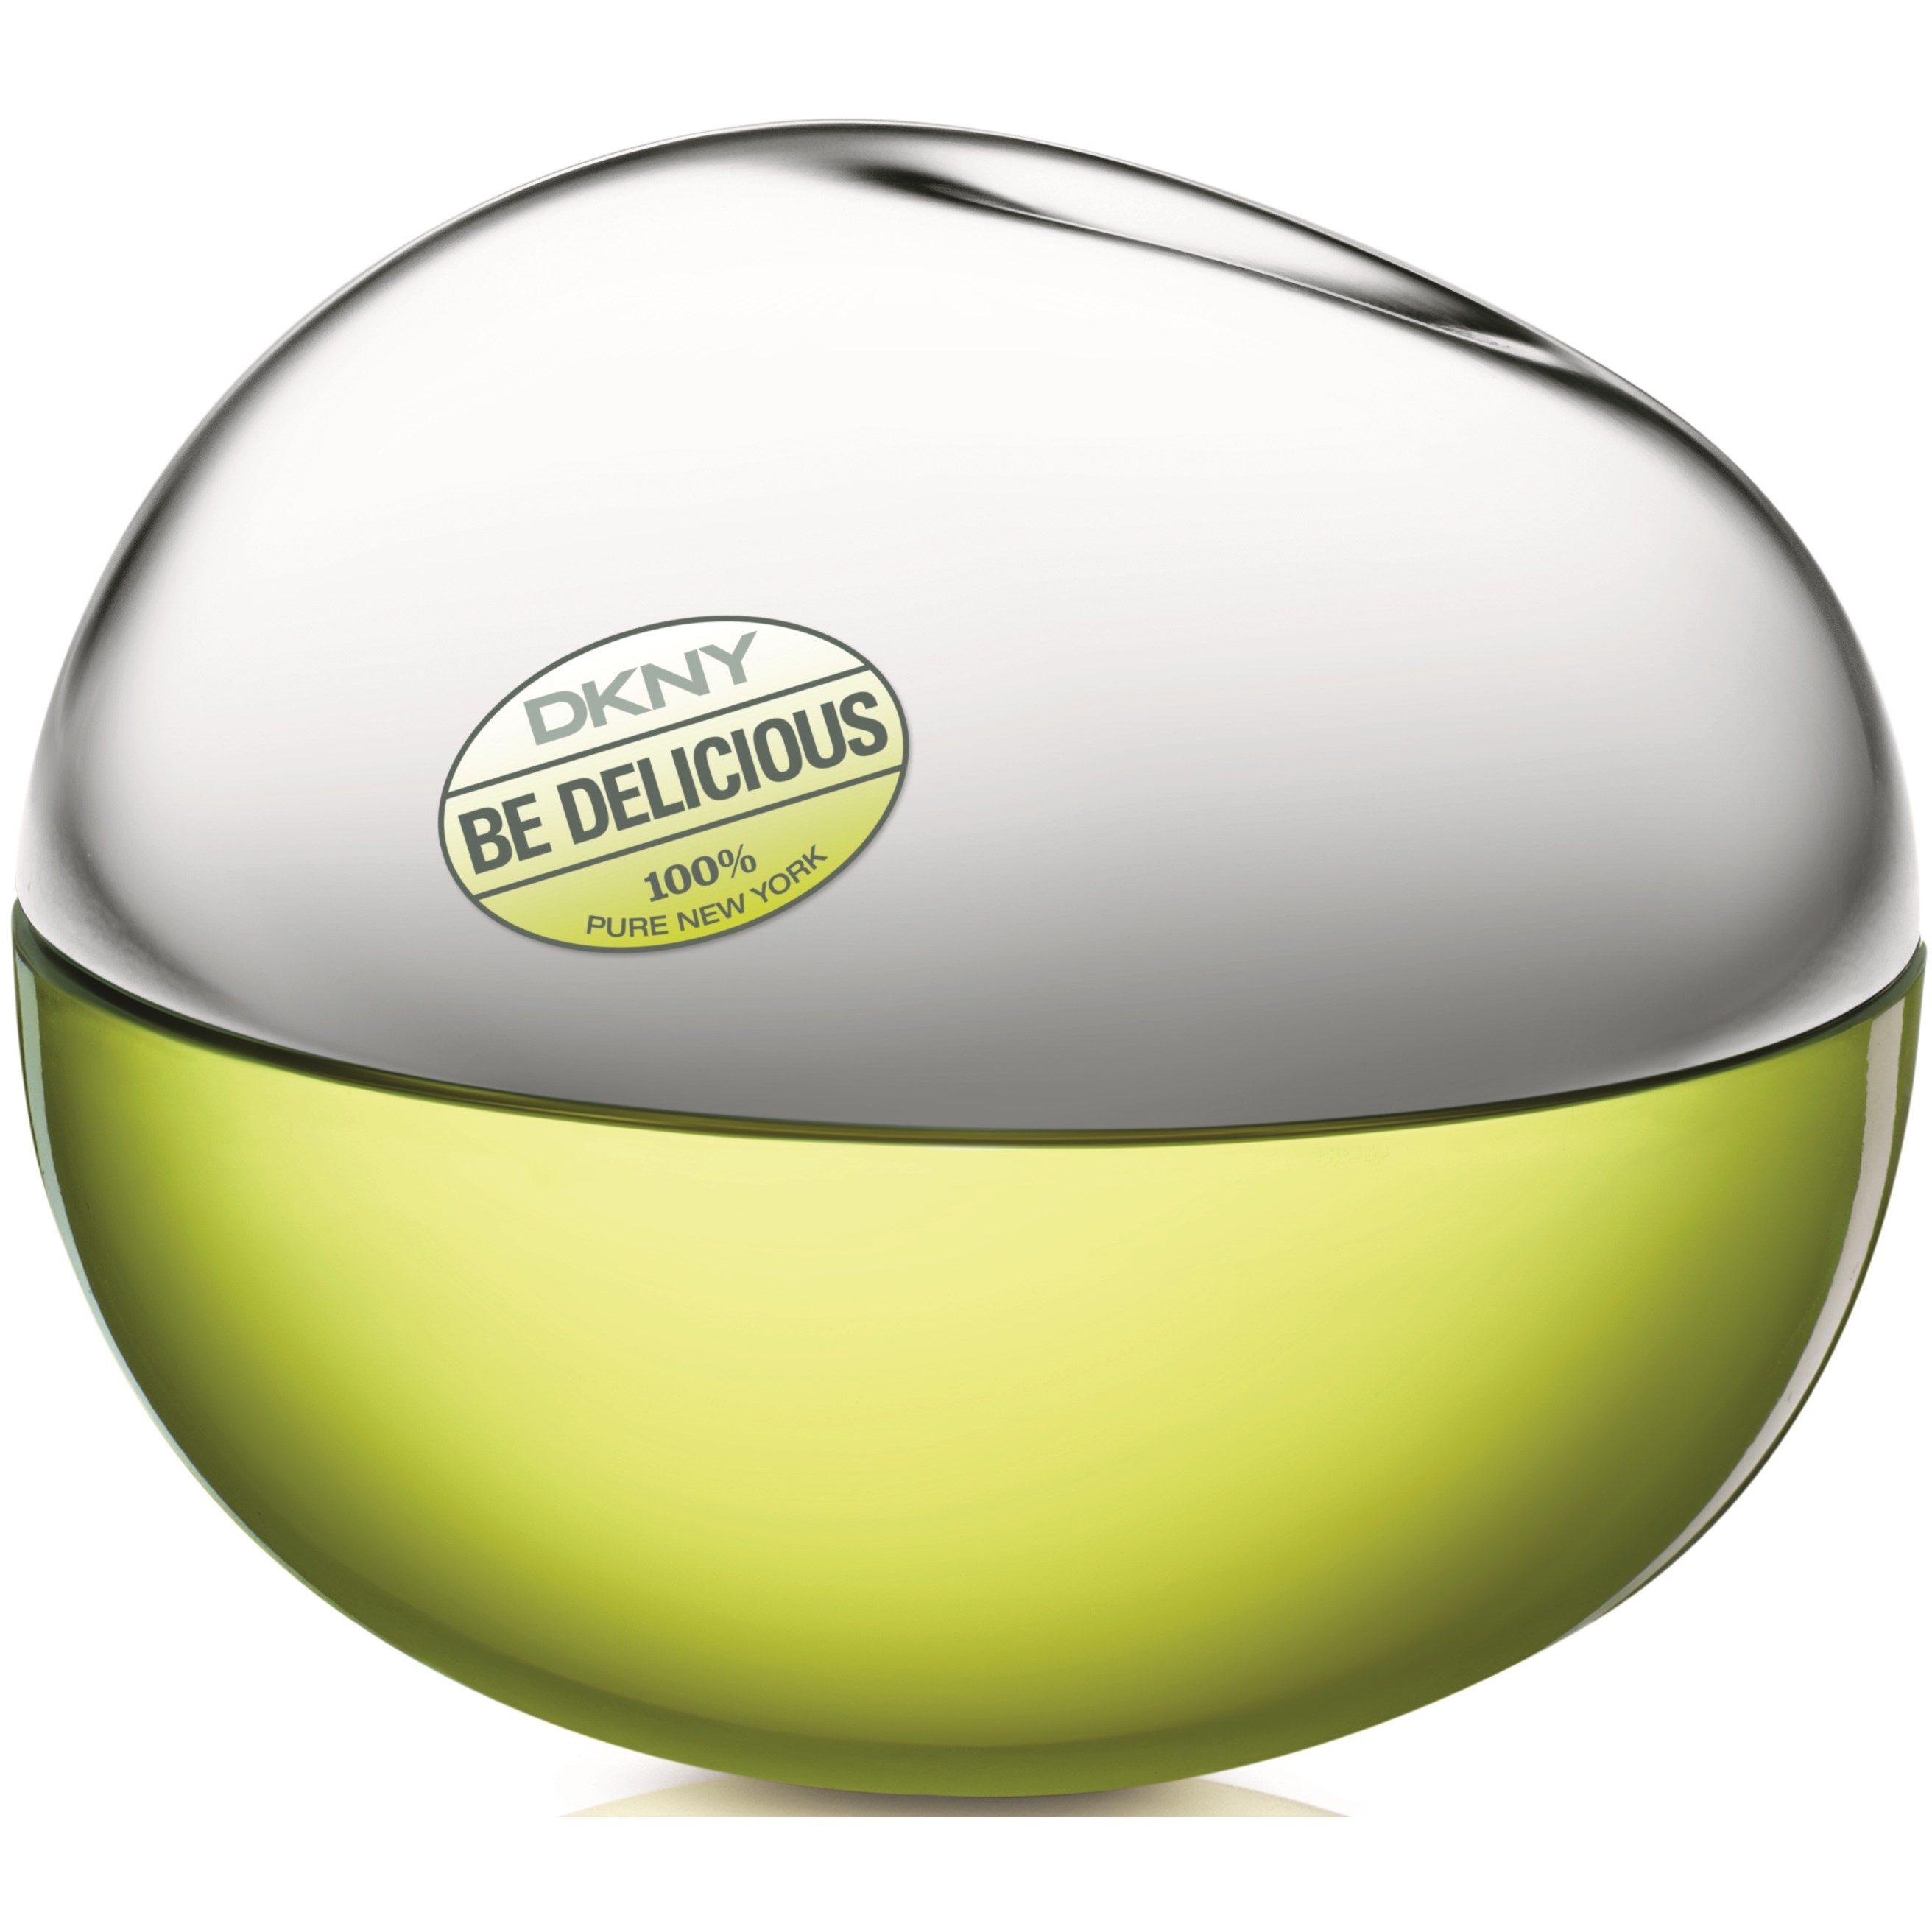 DKNY Be Delicious For Women Edp 50ml